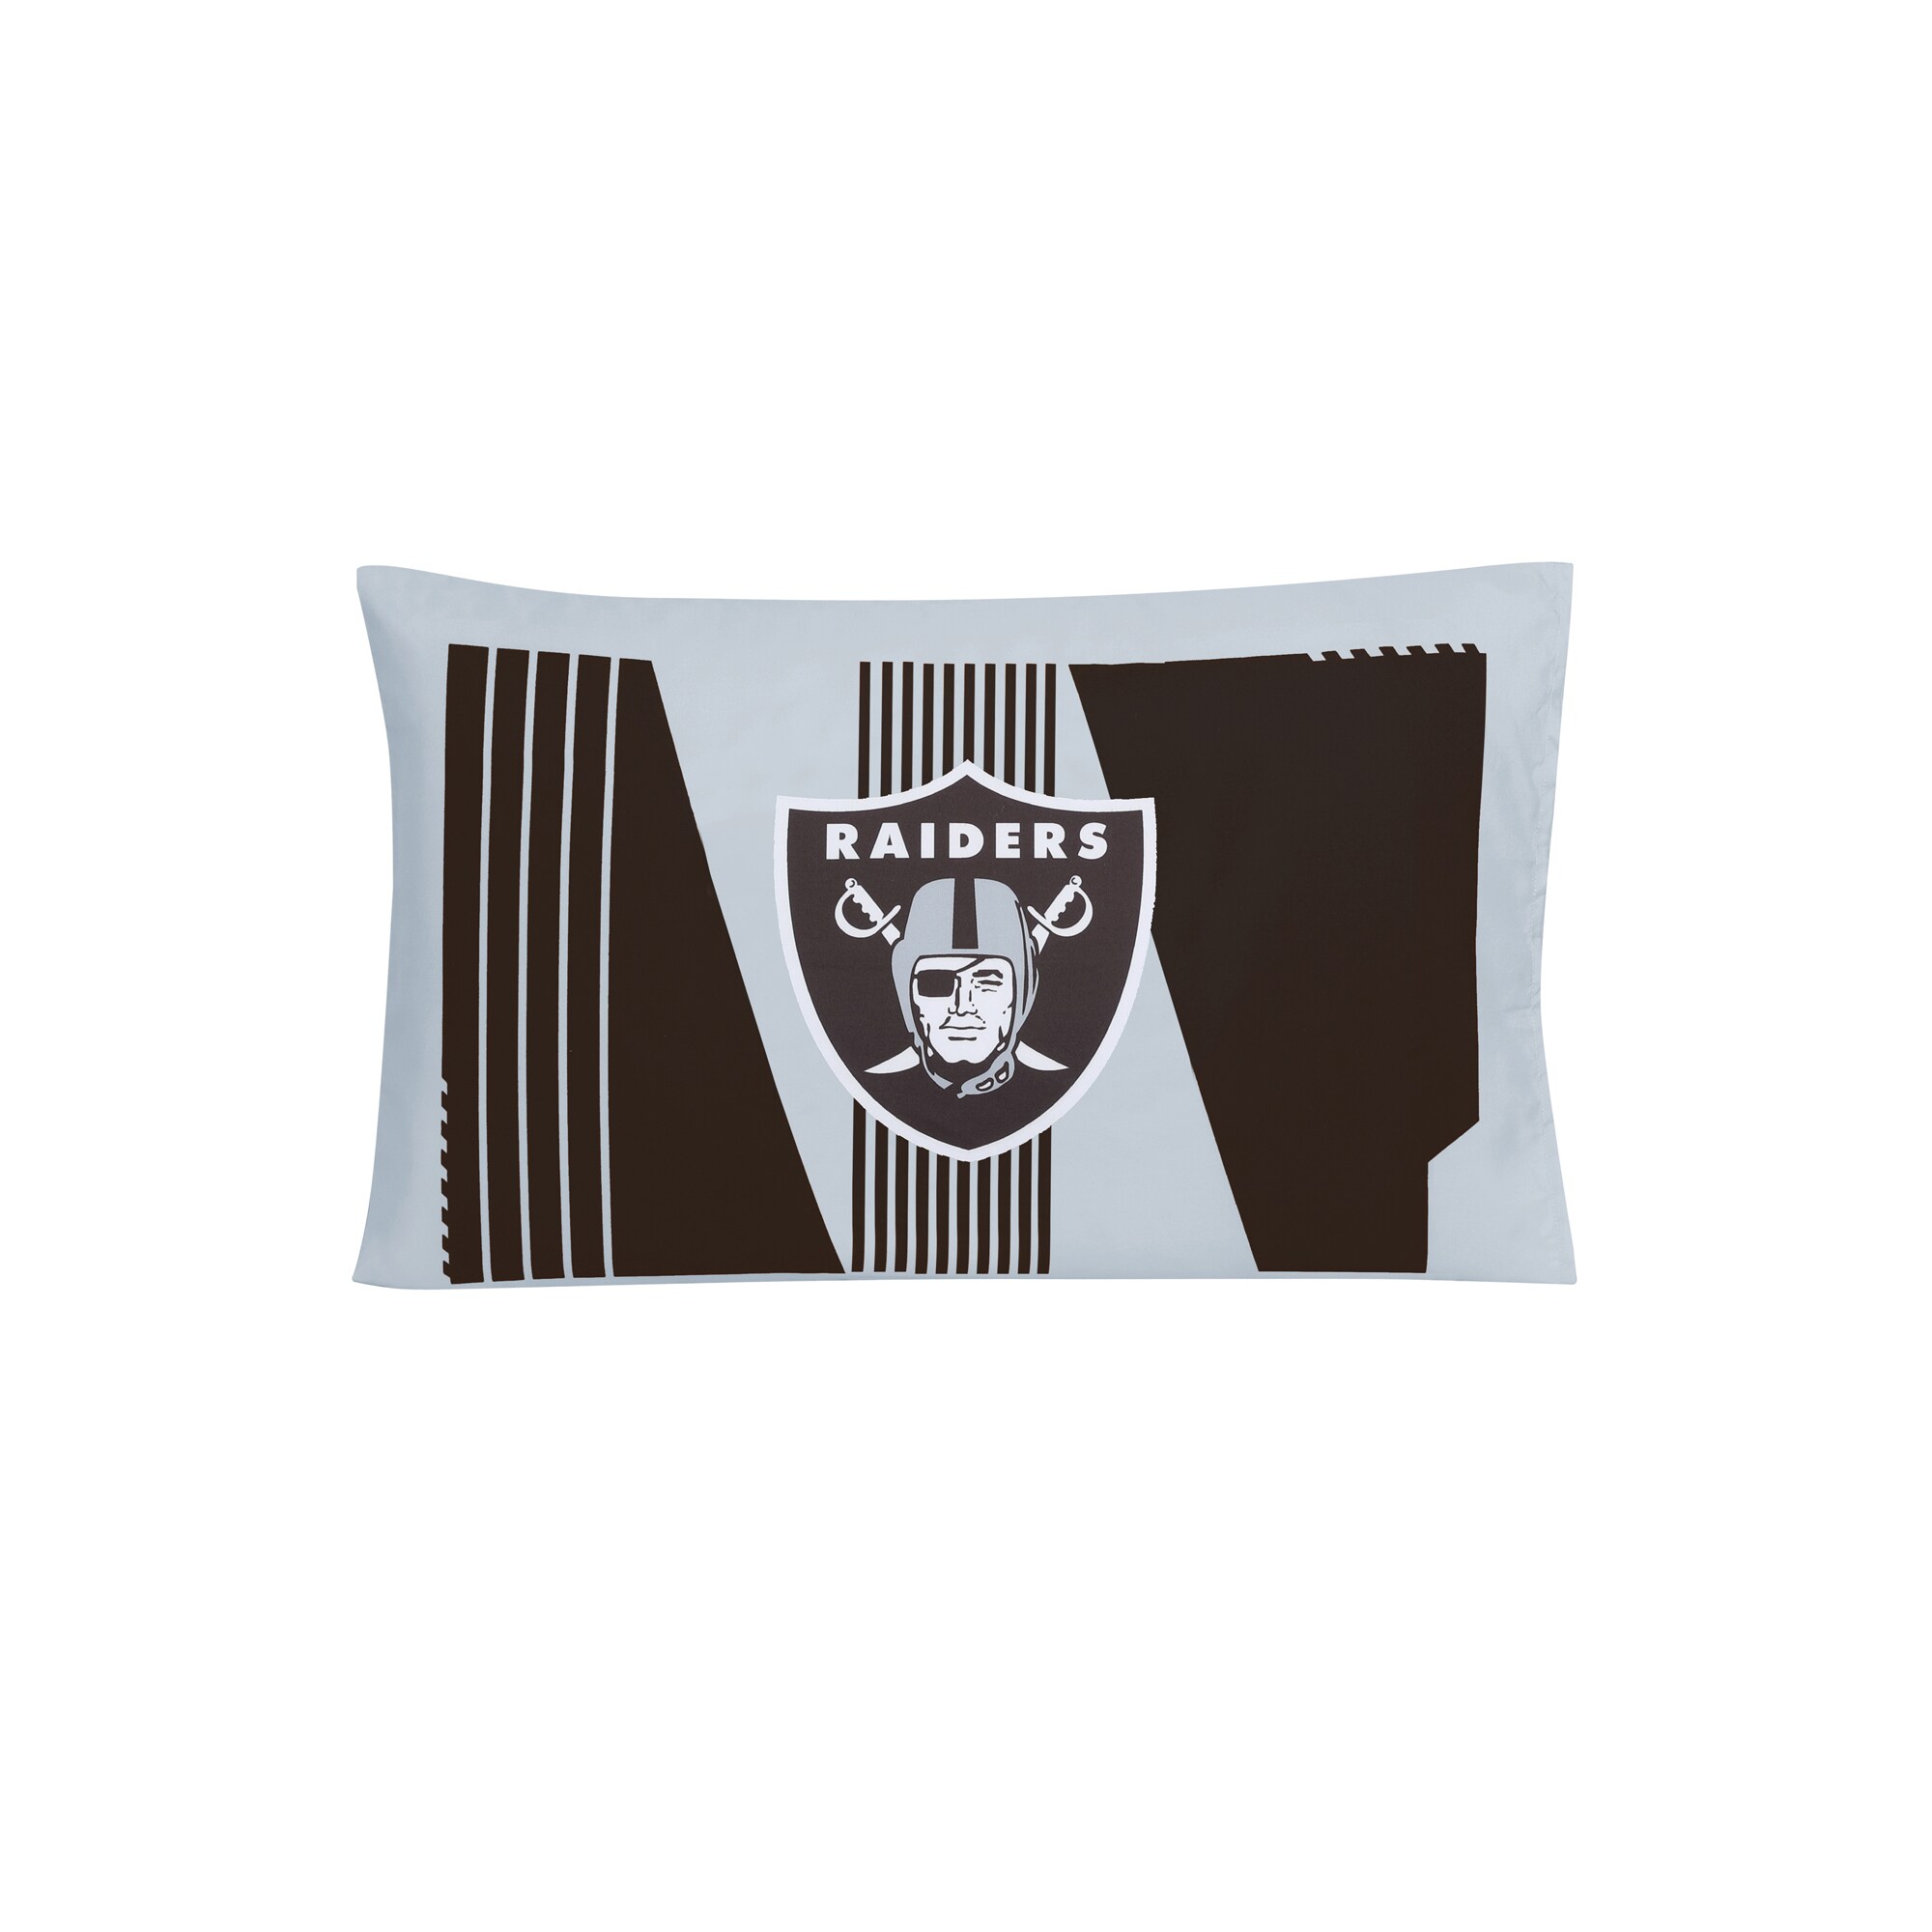 Cathay Sports Las Vegas Raiders 3-Piece Silver/Black Full/Queen Comforter  Set in the Bedding Sets department at